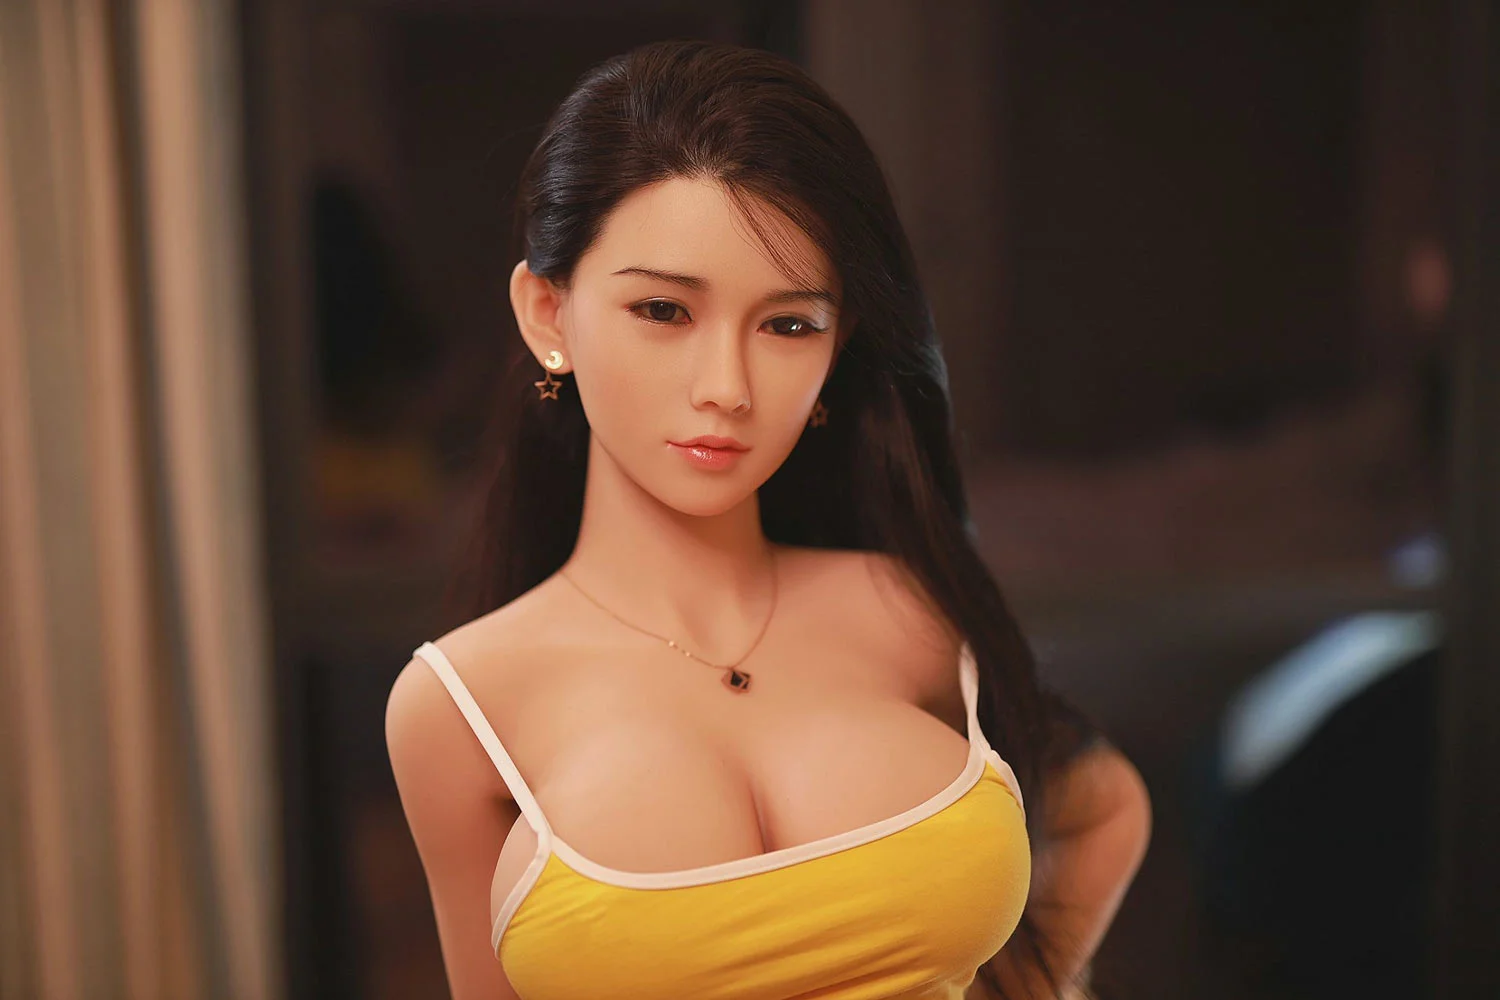 Sex doll with necklace